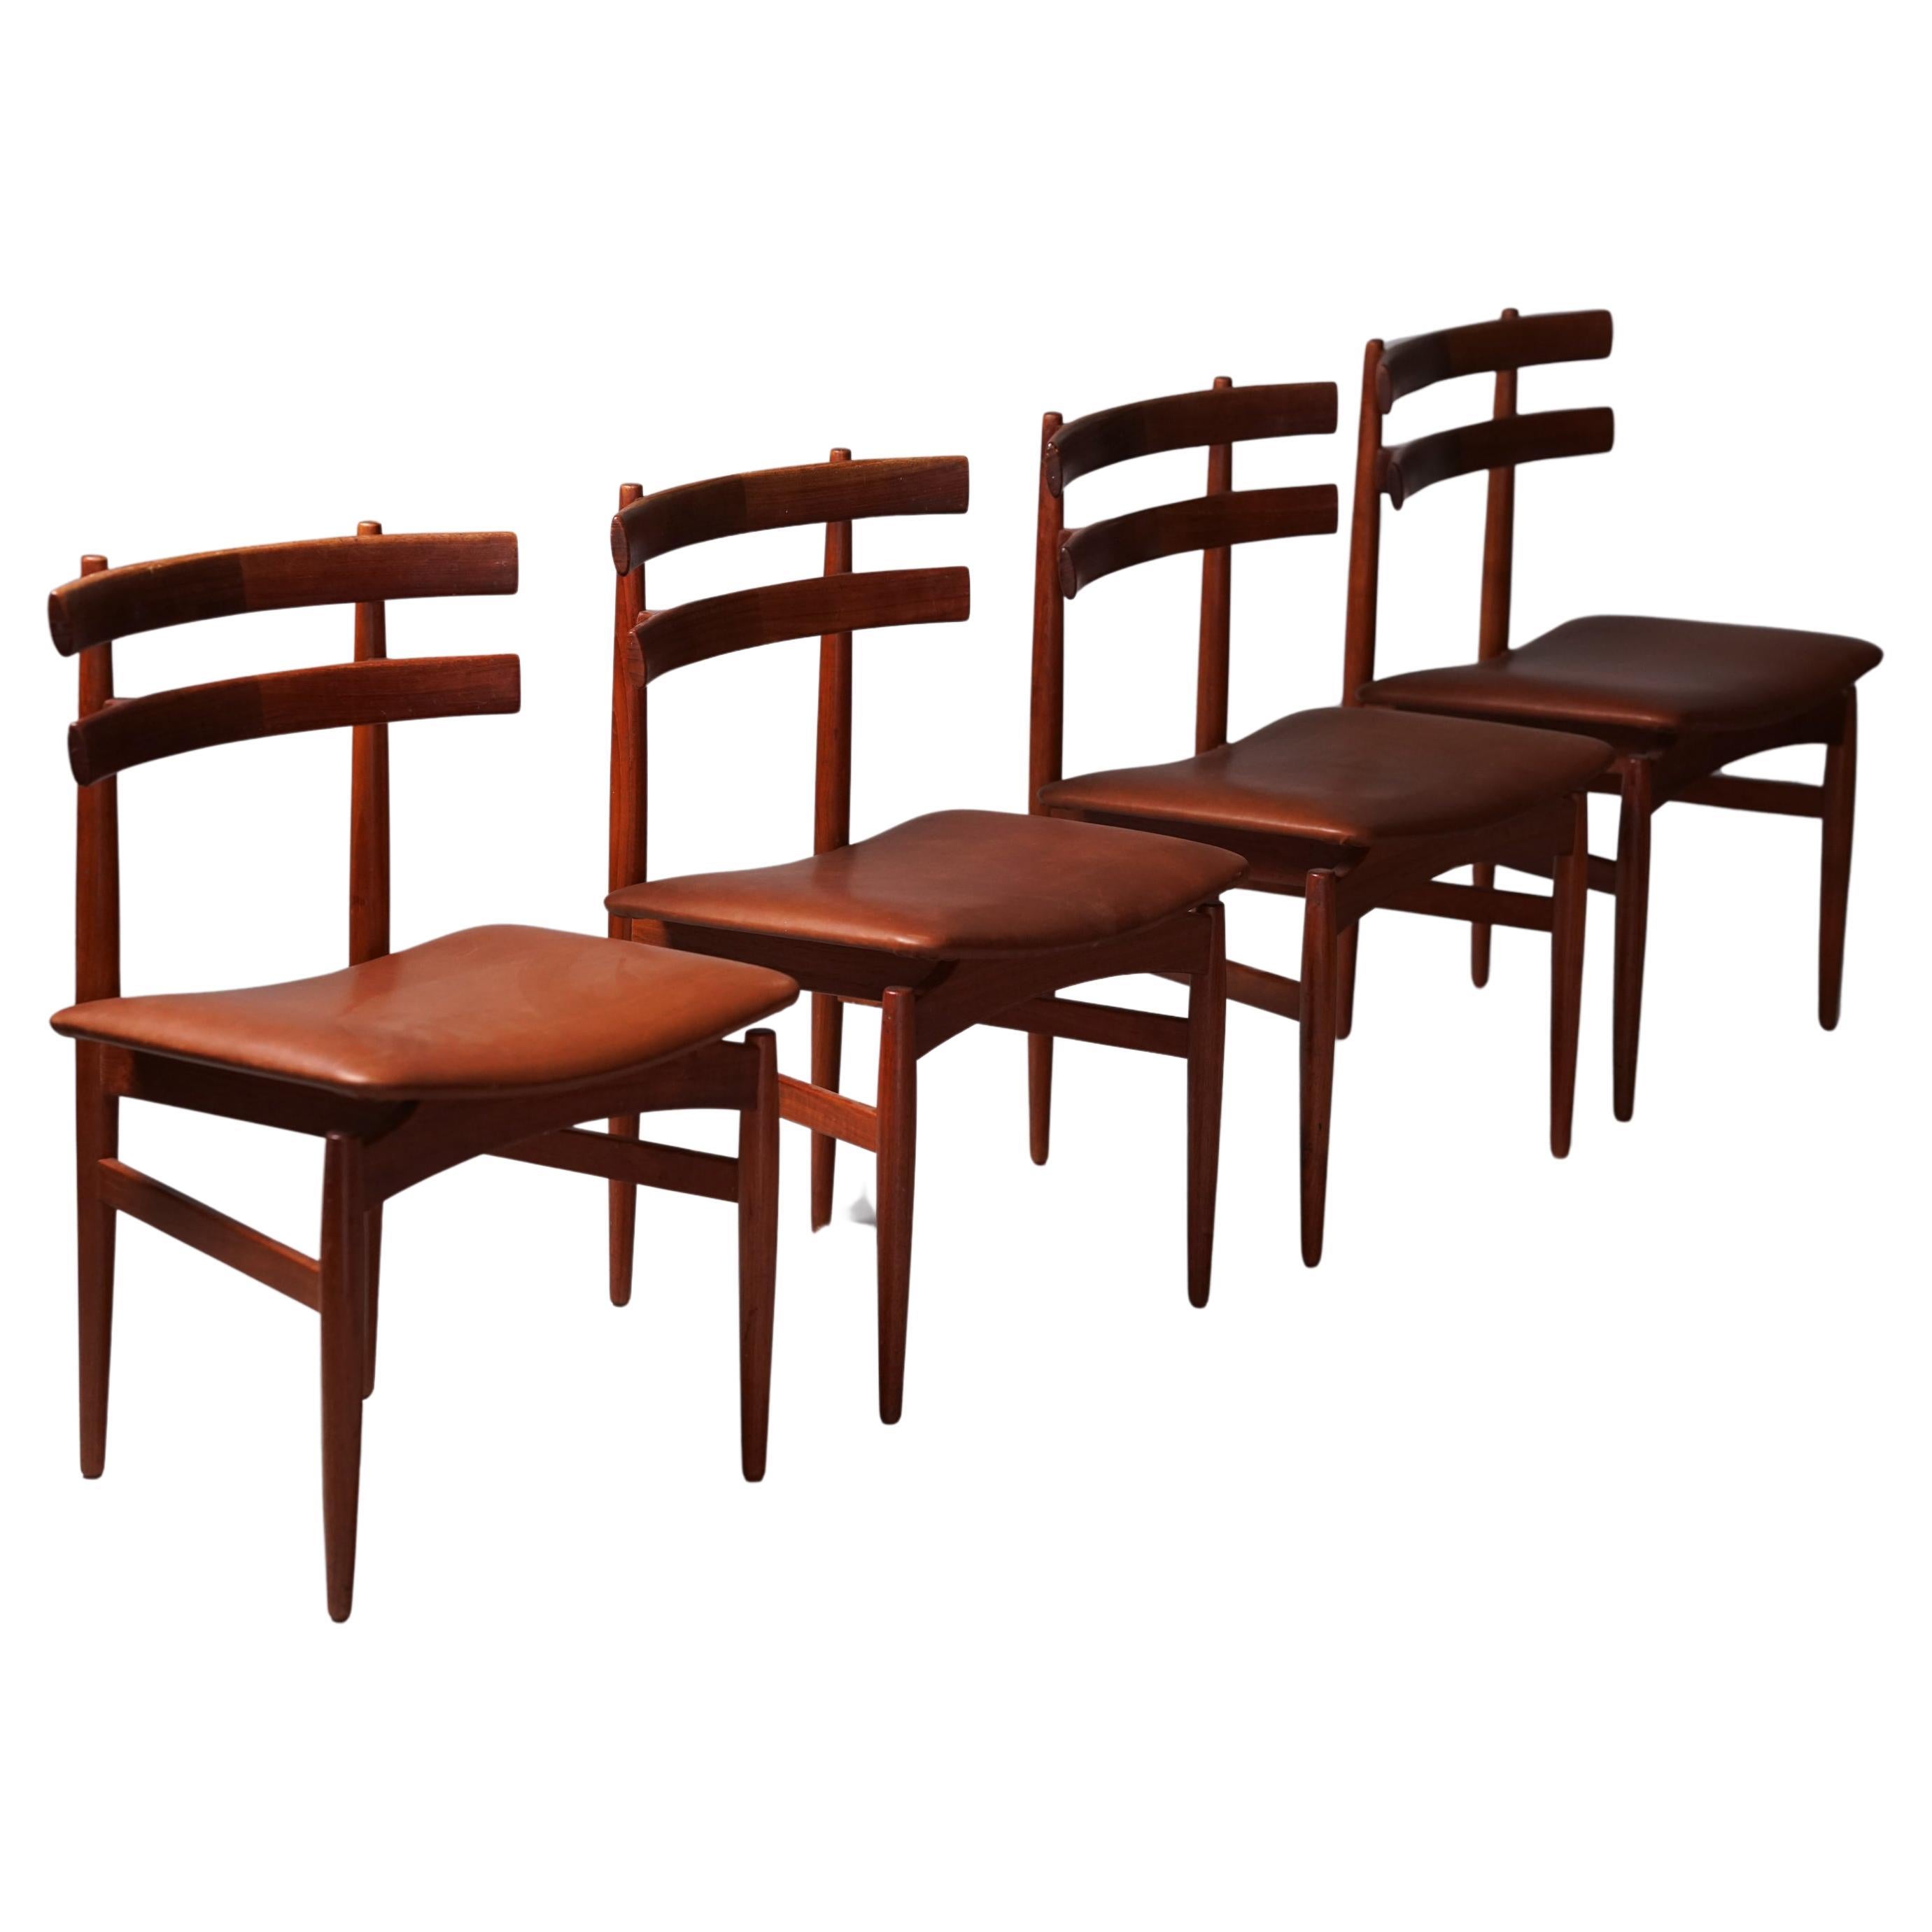 Set of Four Teak Chairs, Poul Hundevad, 1960s For Sale